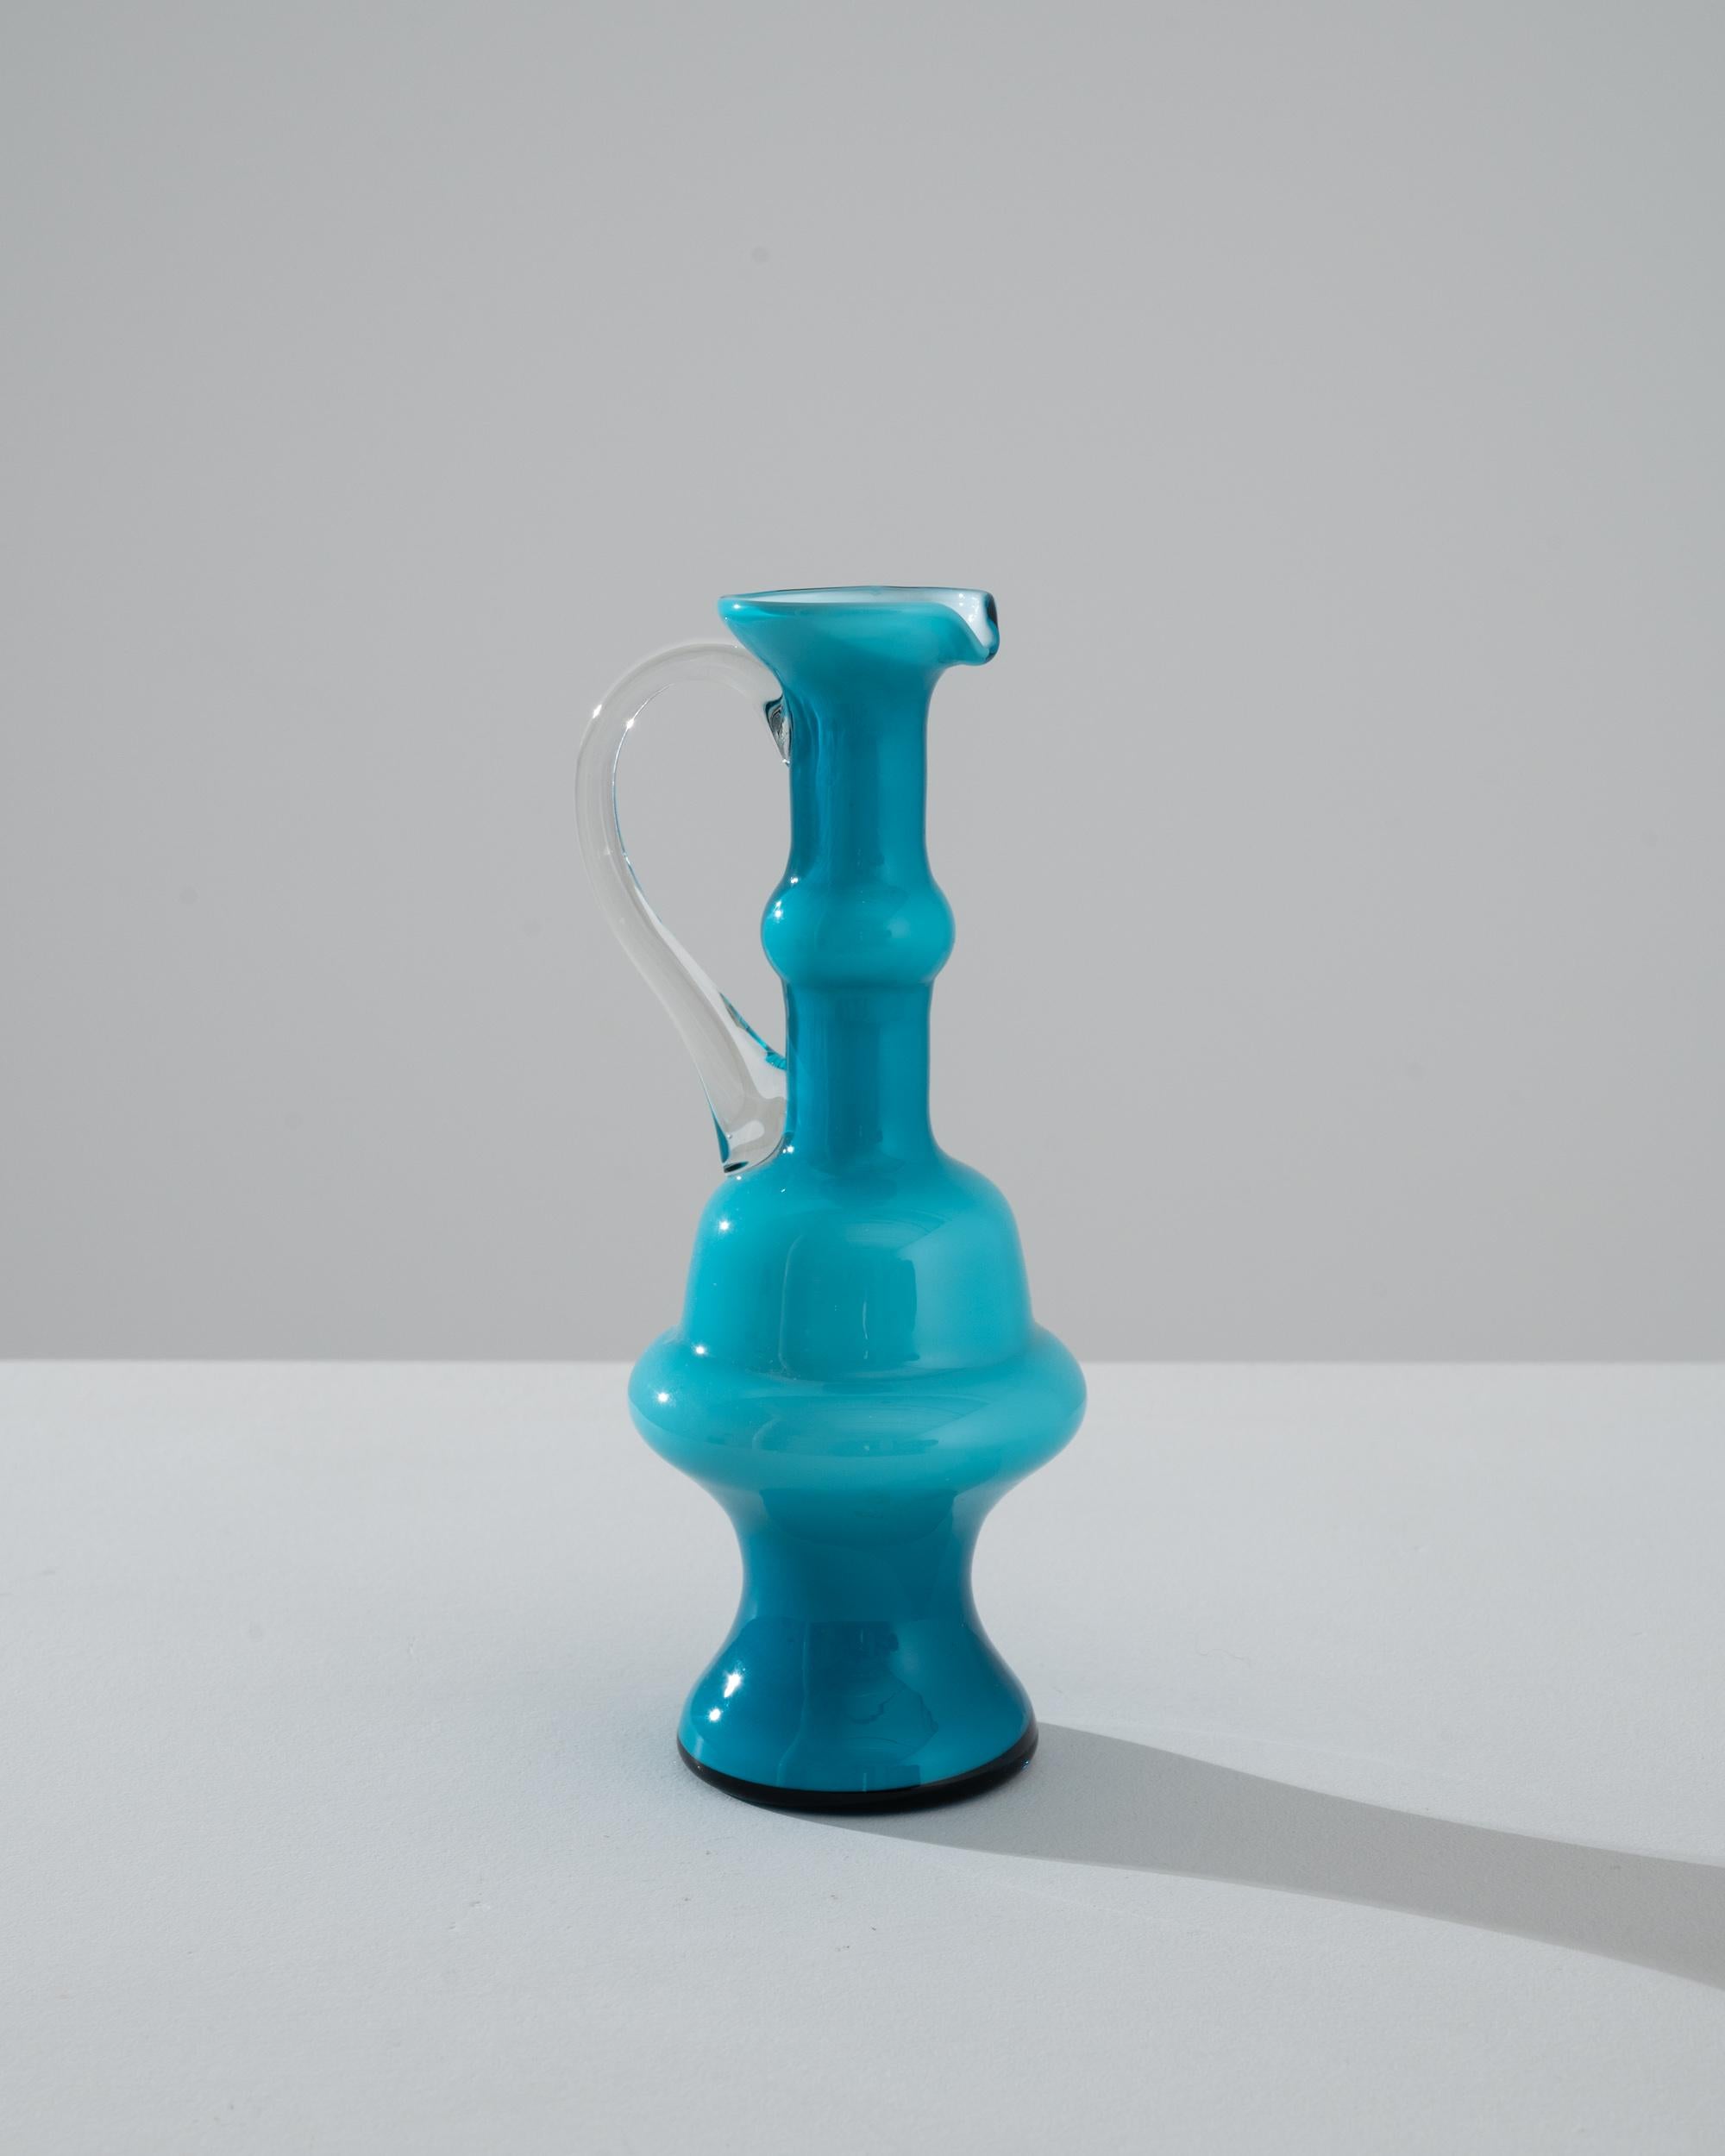 Behold a piece of Italian history with this stunning 1960s Italian Blue Glass Jug, an embodiment of form and function in one artful creation. The vibrant aqua blue glass, meticulously shaped into a voluptuous body with a graceful neck and pouring